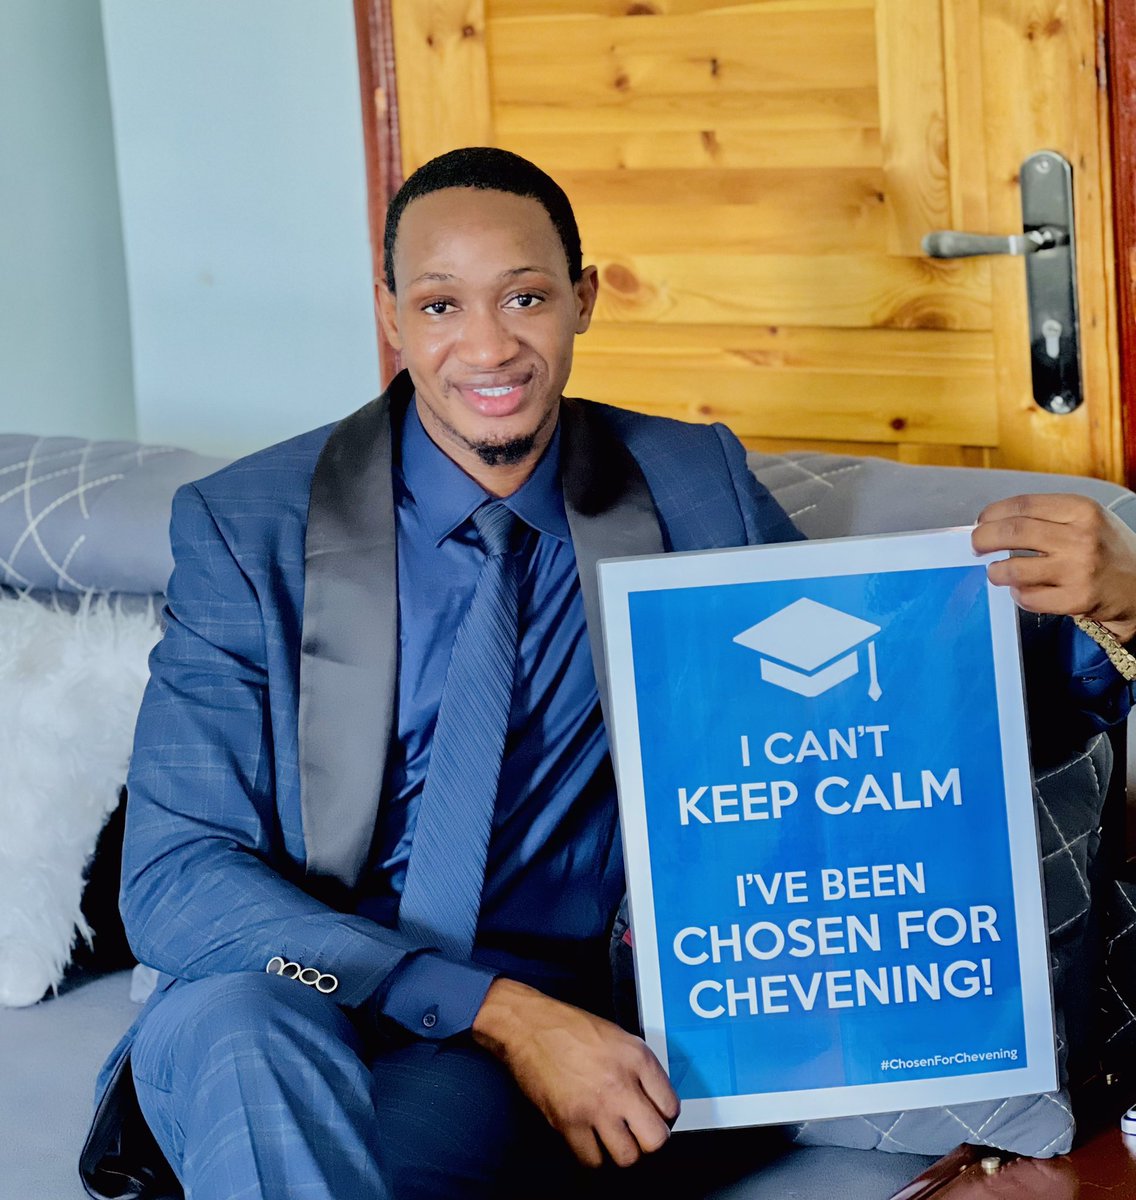 #I can’t keep calm, I’ve been chosen for Chevening!

Immensely delighted to share that I’ve been #chosenforchevening to study LLM - Human Rights Law at the #BEST Social Science University in the world #The London School of Economics and Political Science - LSE.